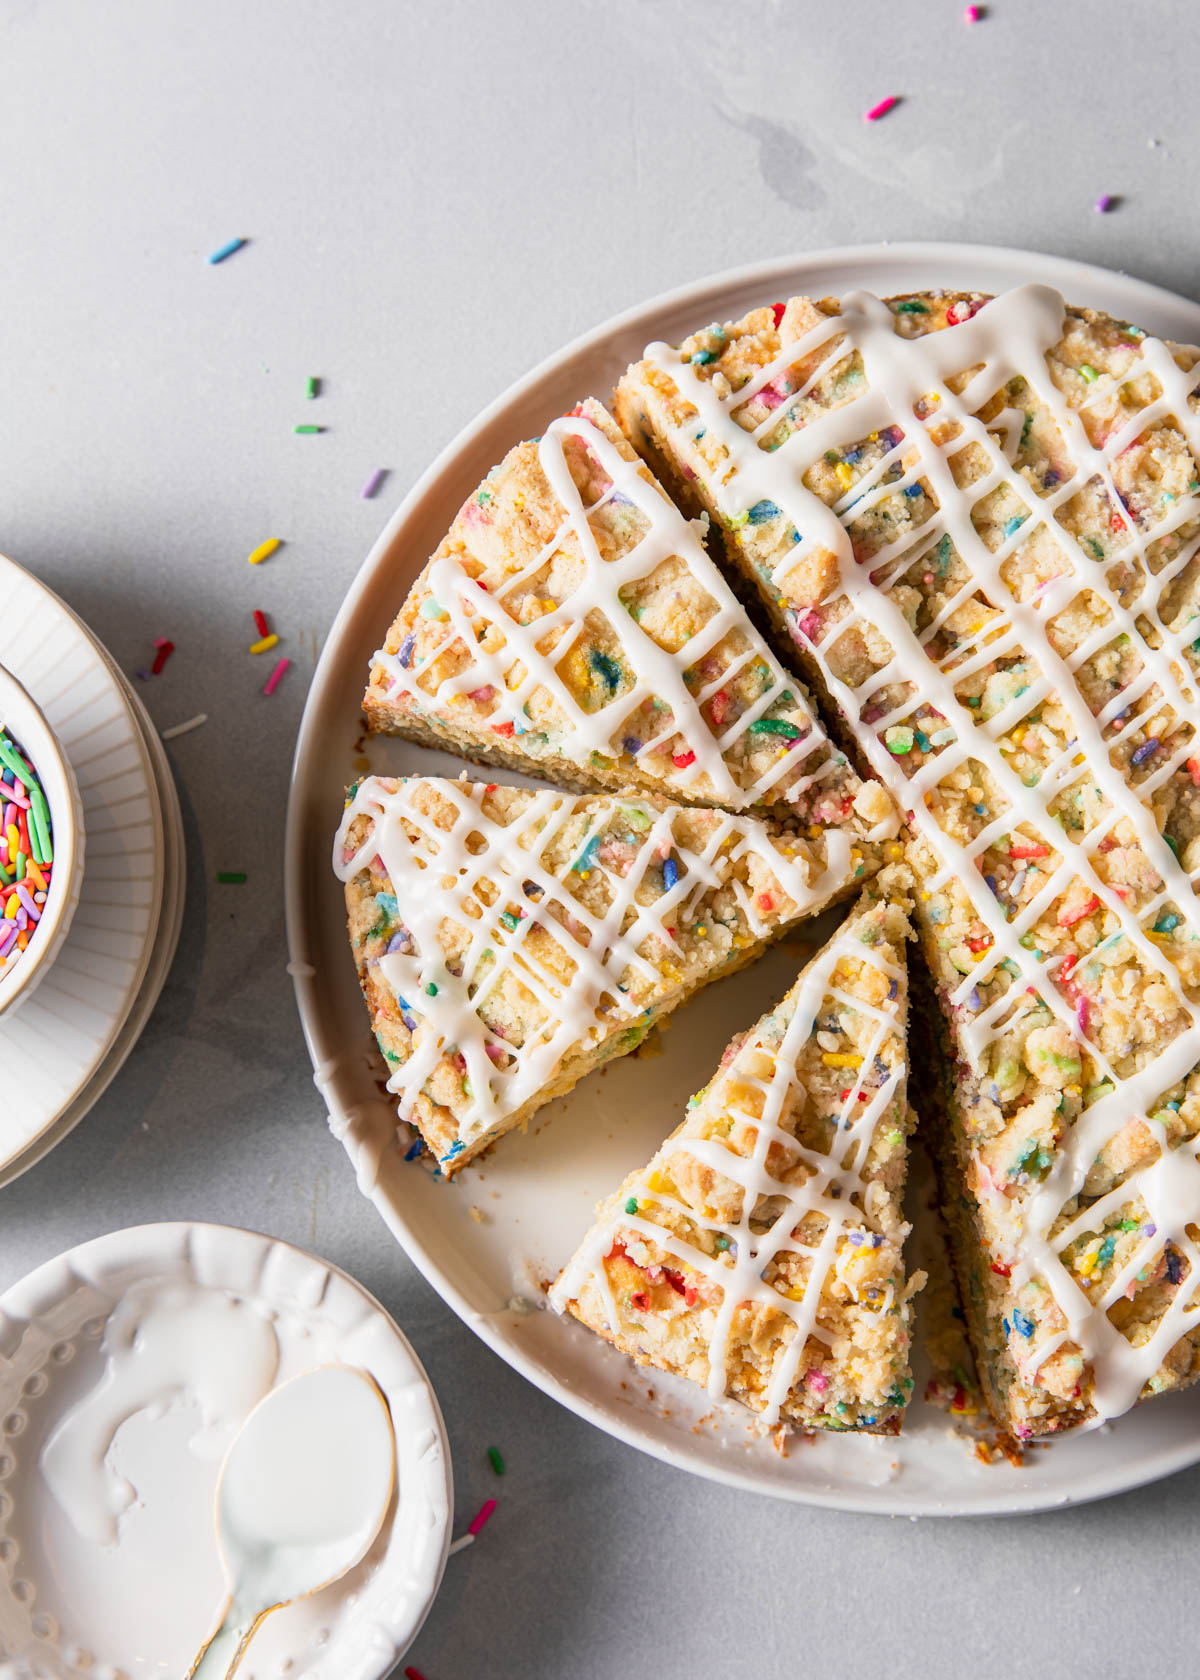 A birthday coffee cake with sprinkles and vanilla glaze on top.